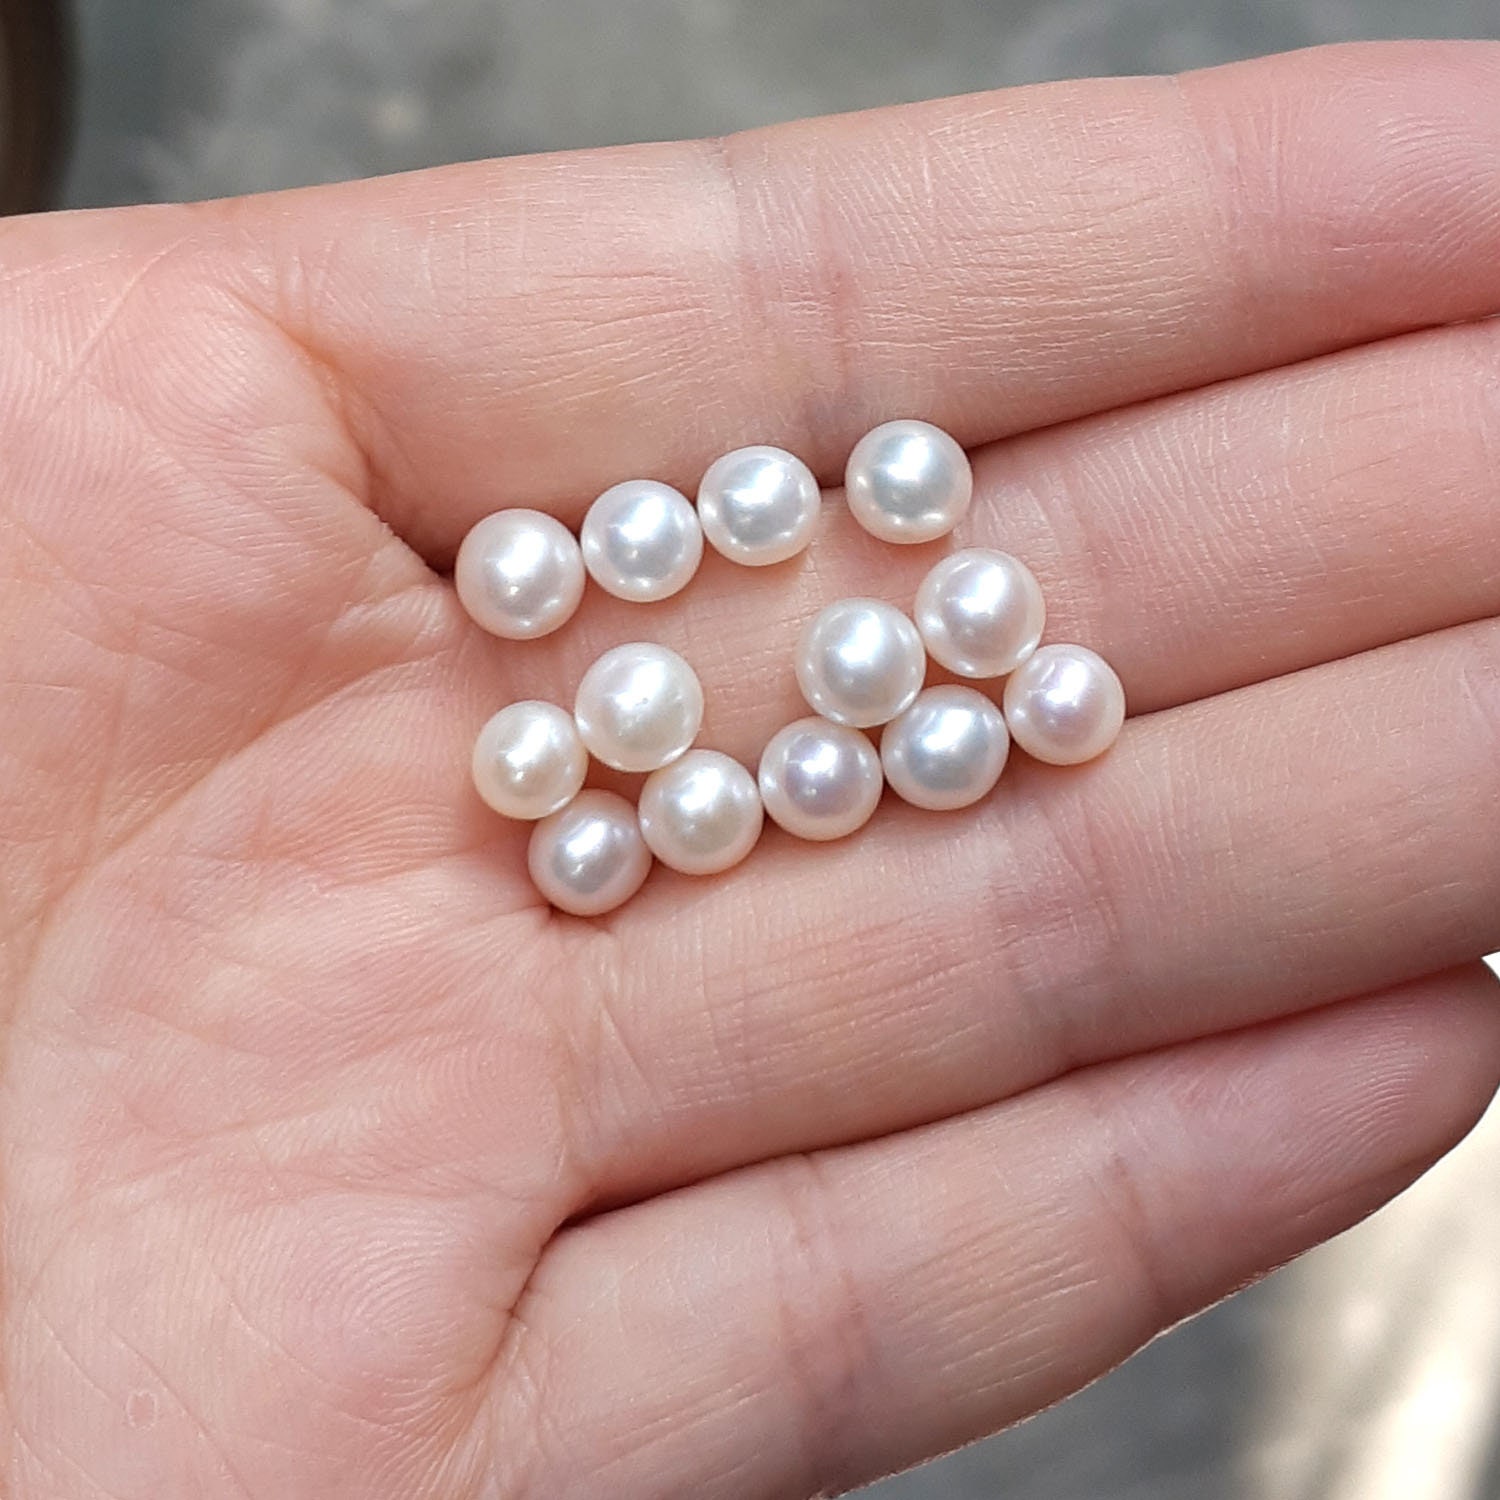 Shop NBEADS 100 Pcs 7~8 mm Natural Cultured Freshwater Pearl Beads